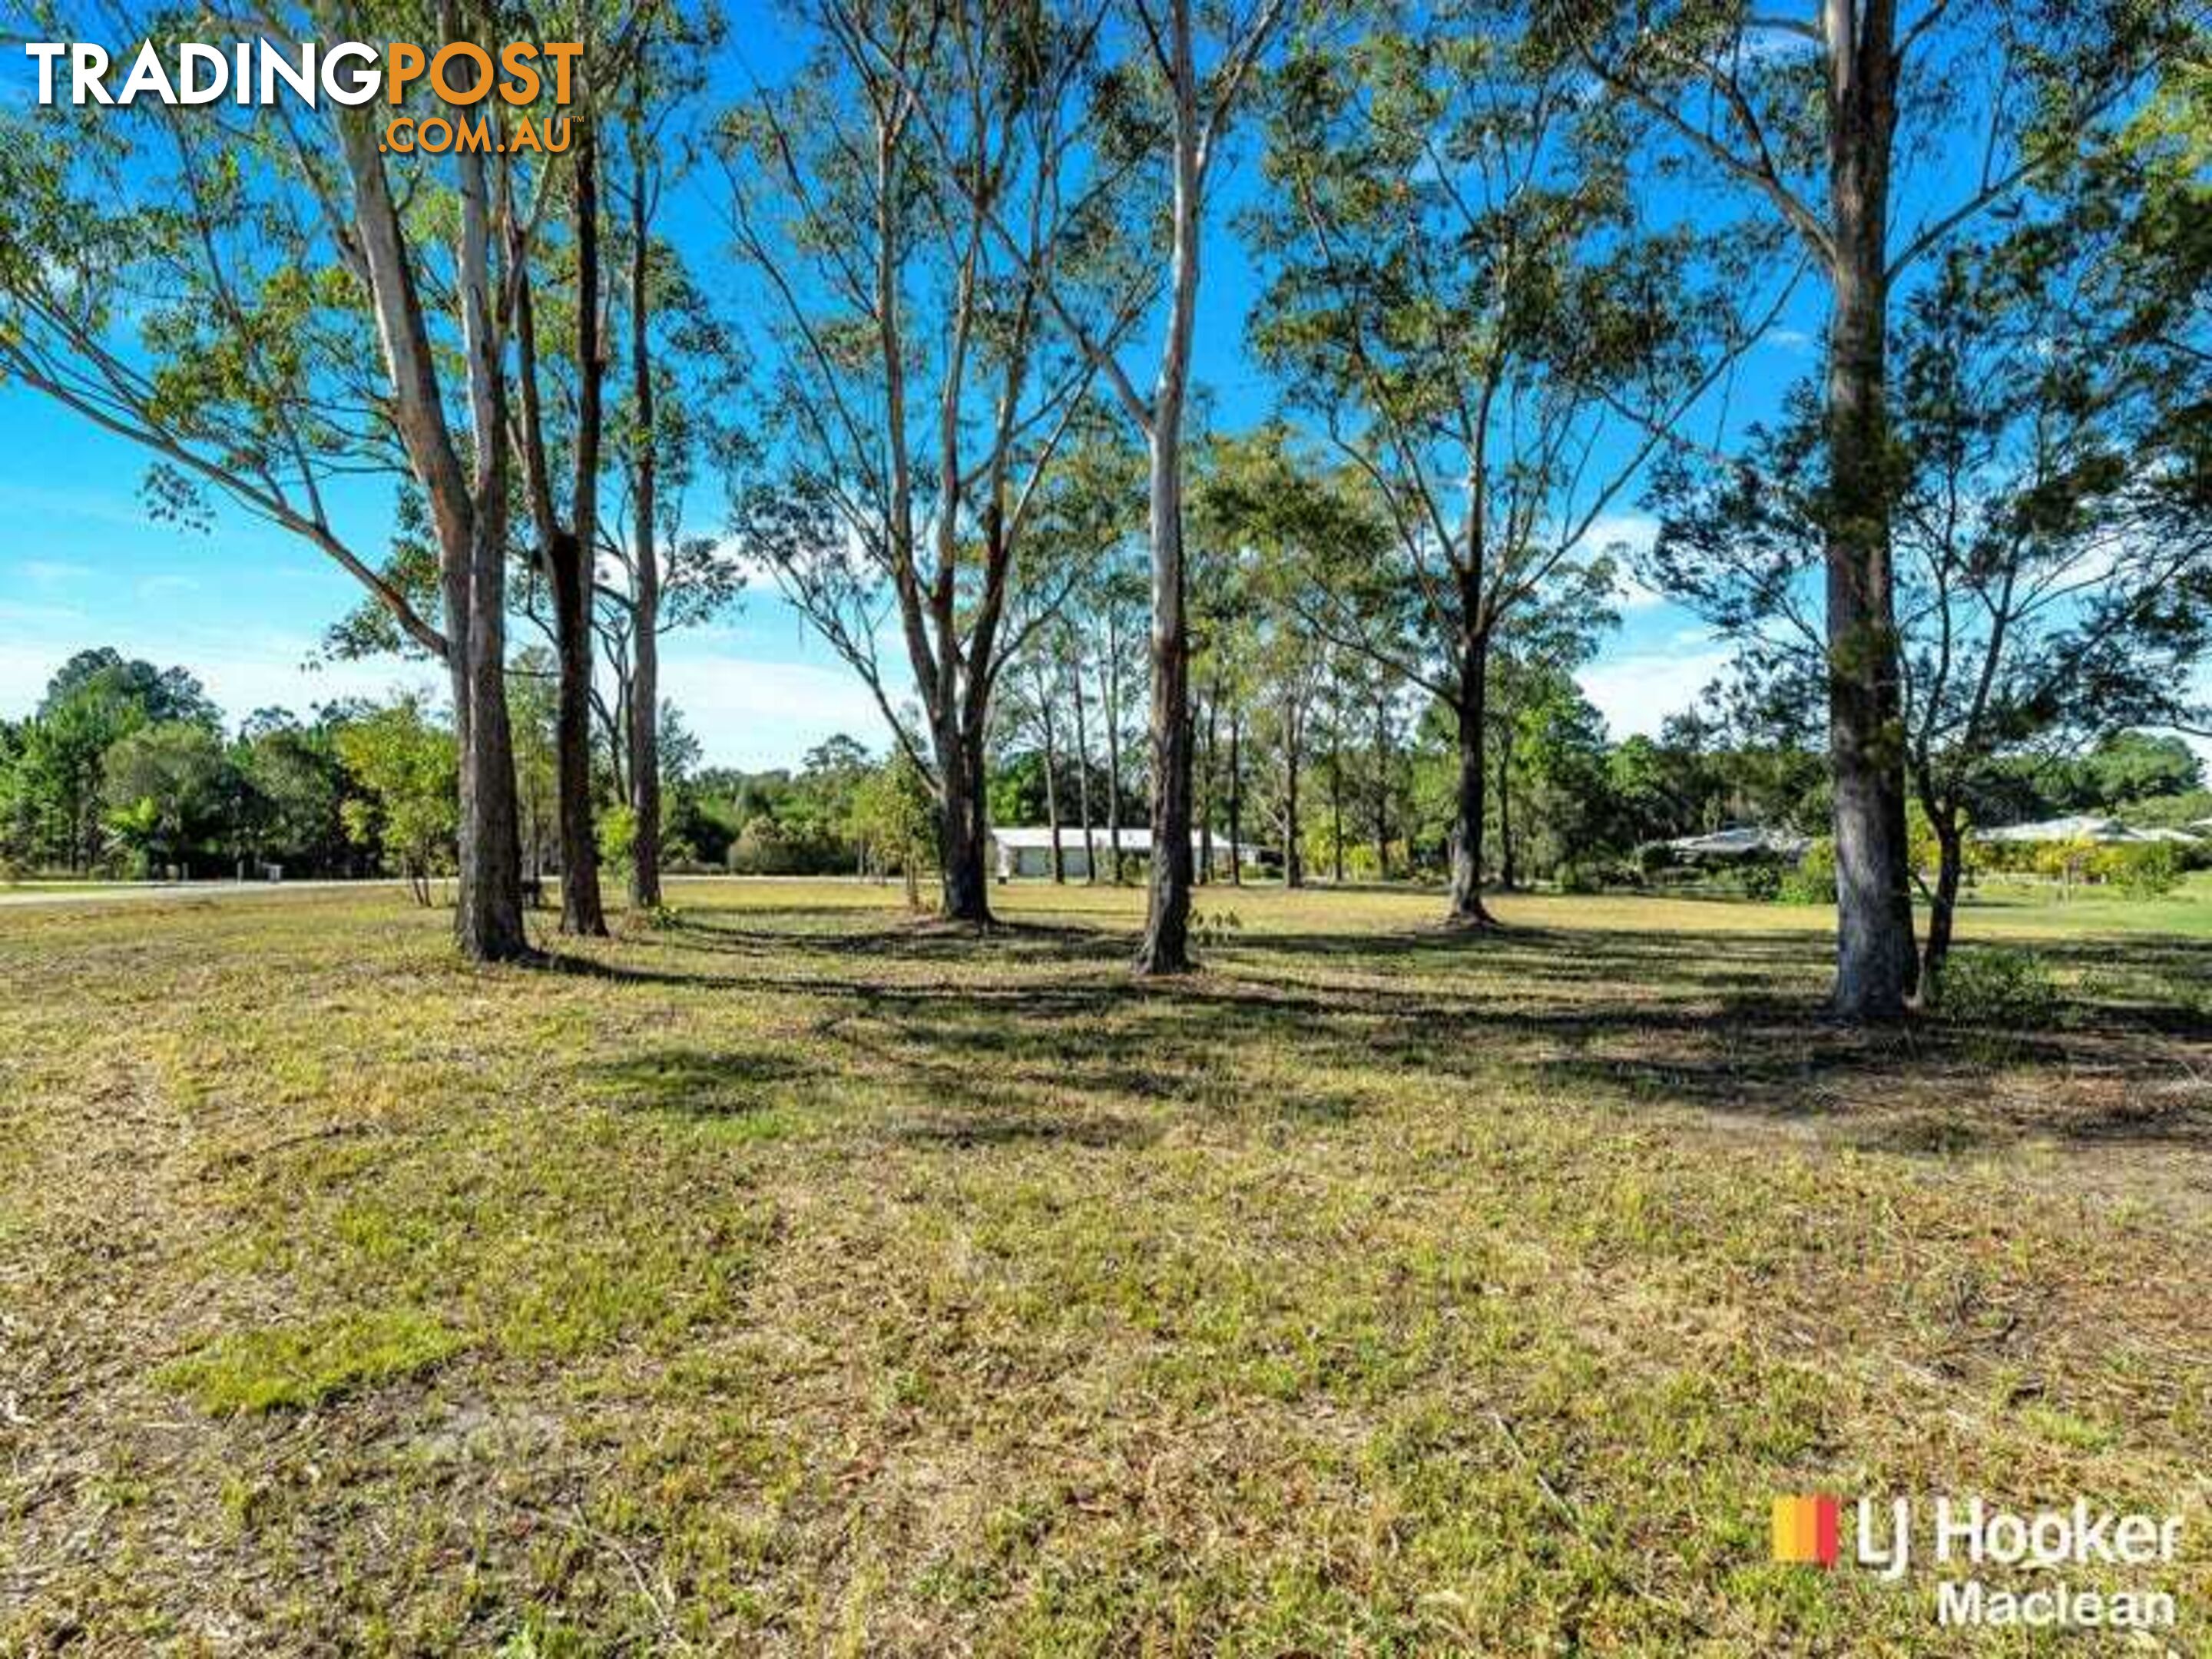 25 Whispering Pines Place GULMARRAD NSW 2463